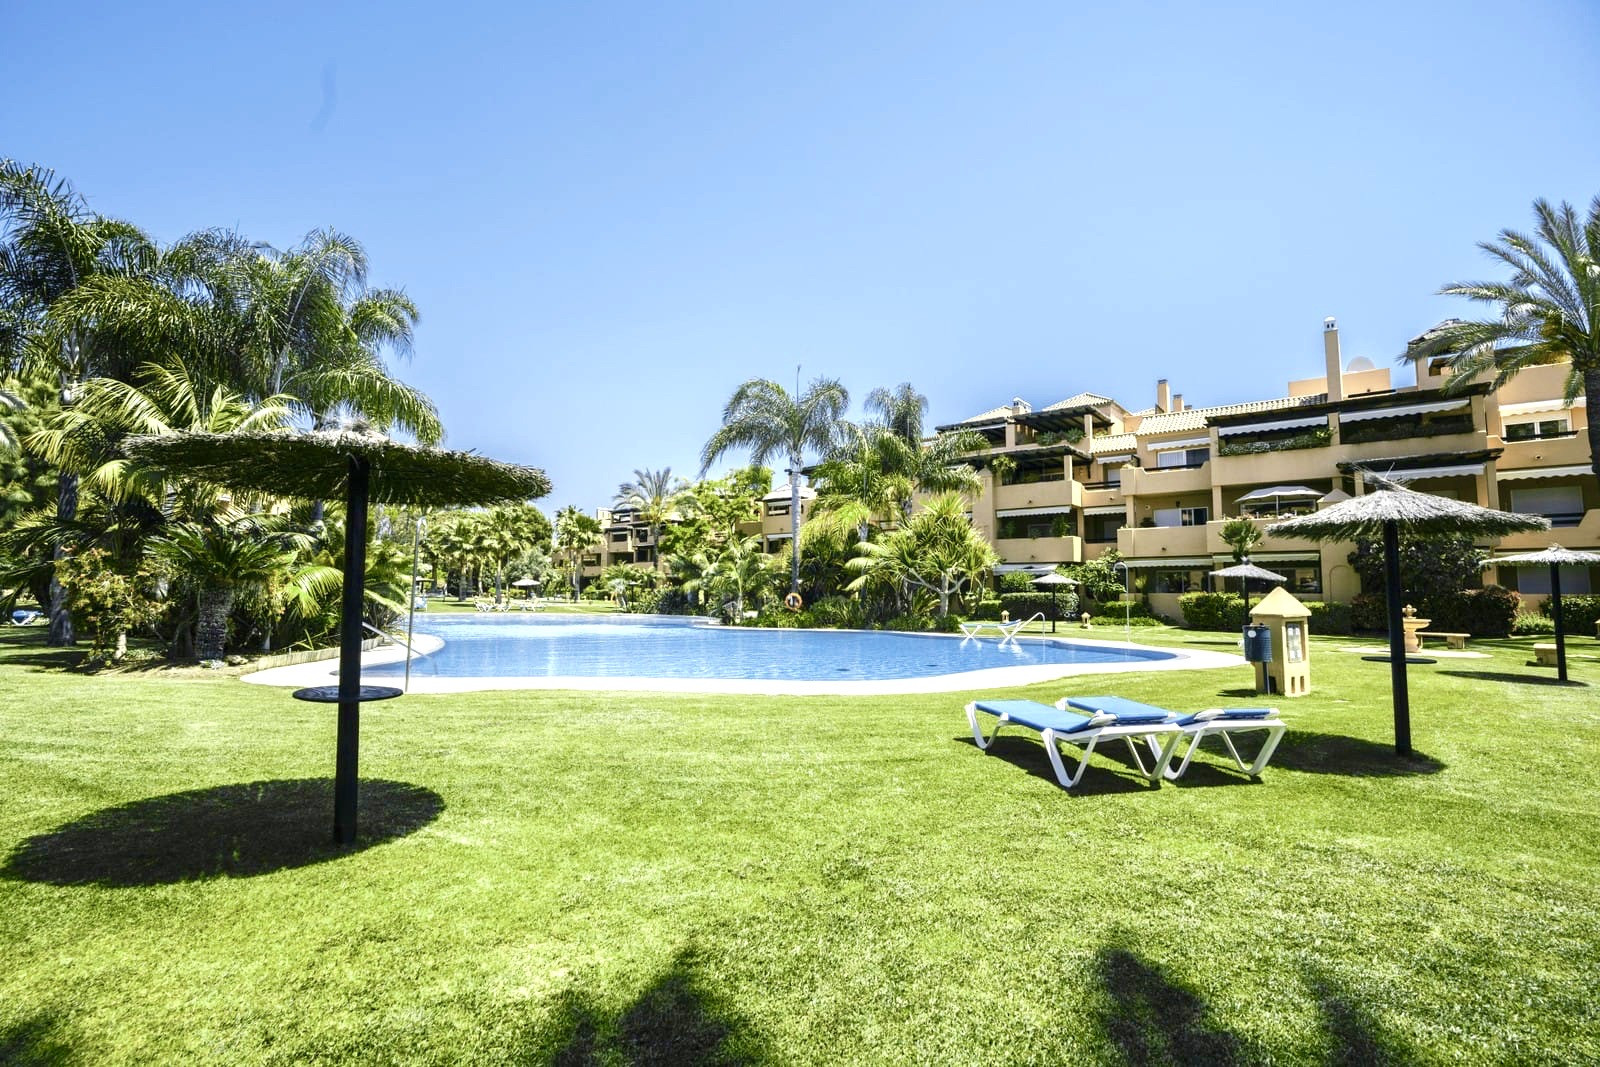 Immaculate and totally renovated ground floor apartment in Alhambra del Golf